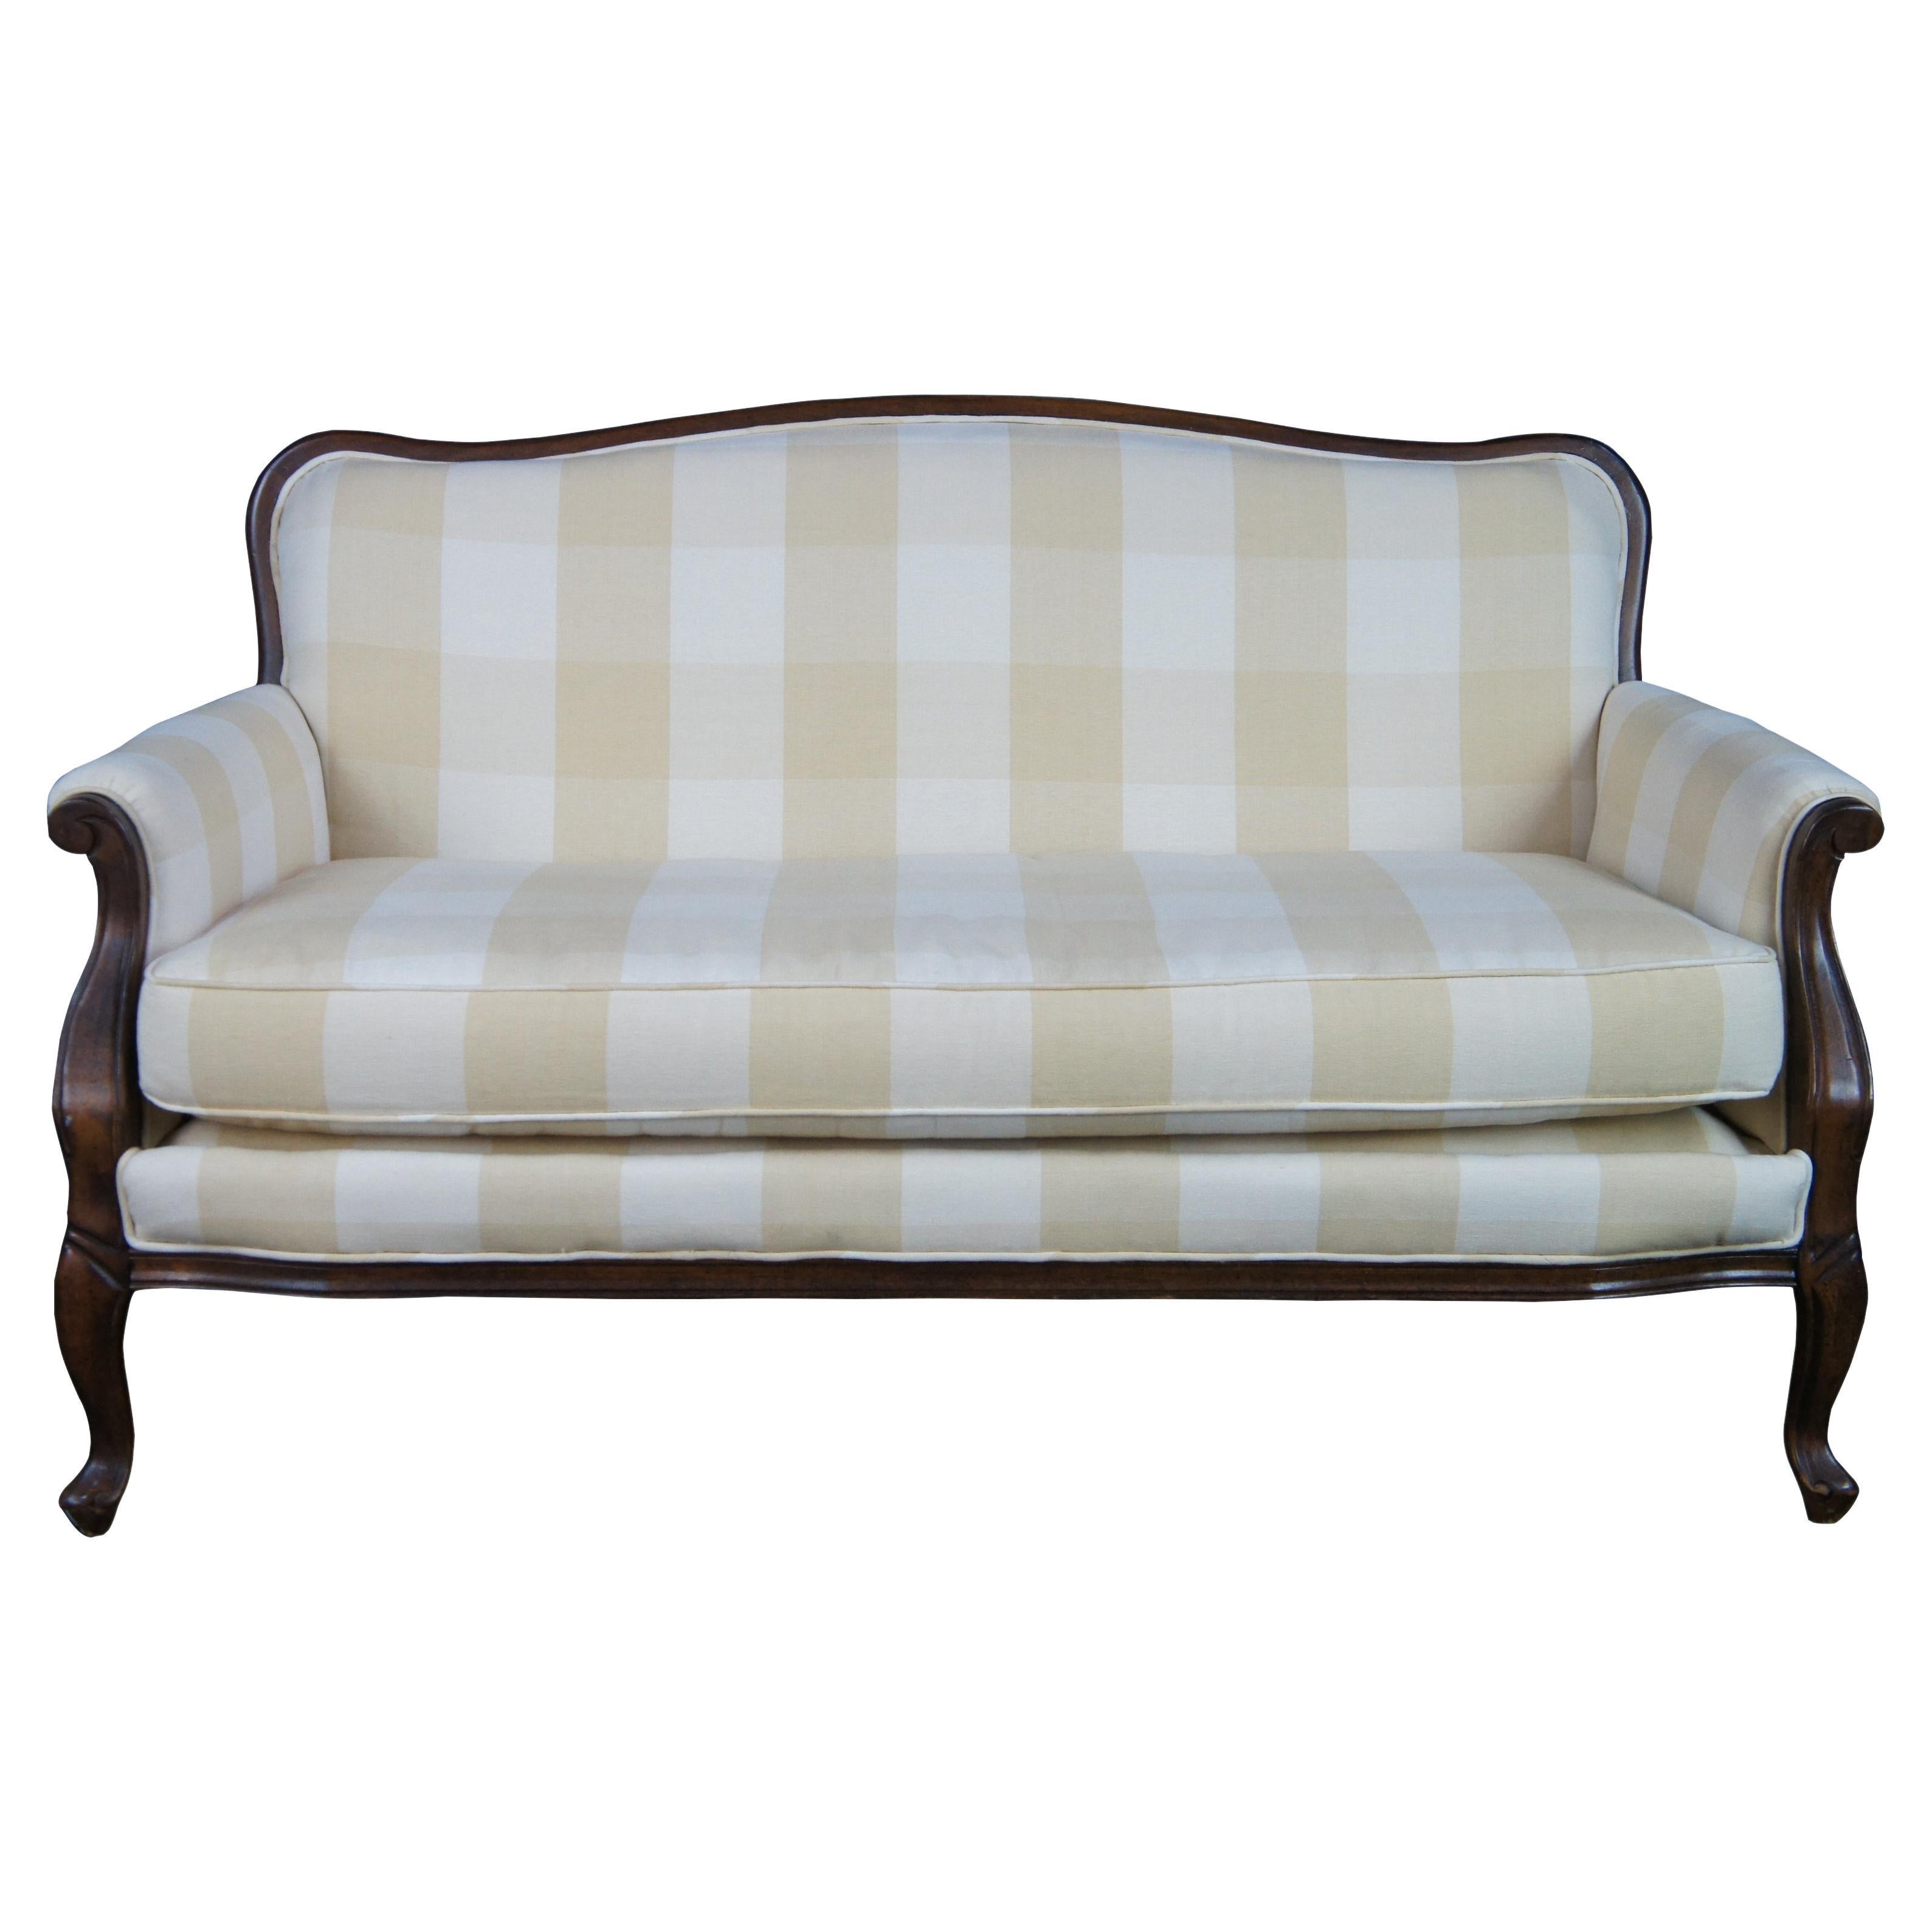 Antique French Country Walnut Plaid Serpentine Camelback Settee Love Seat